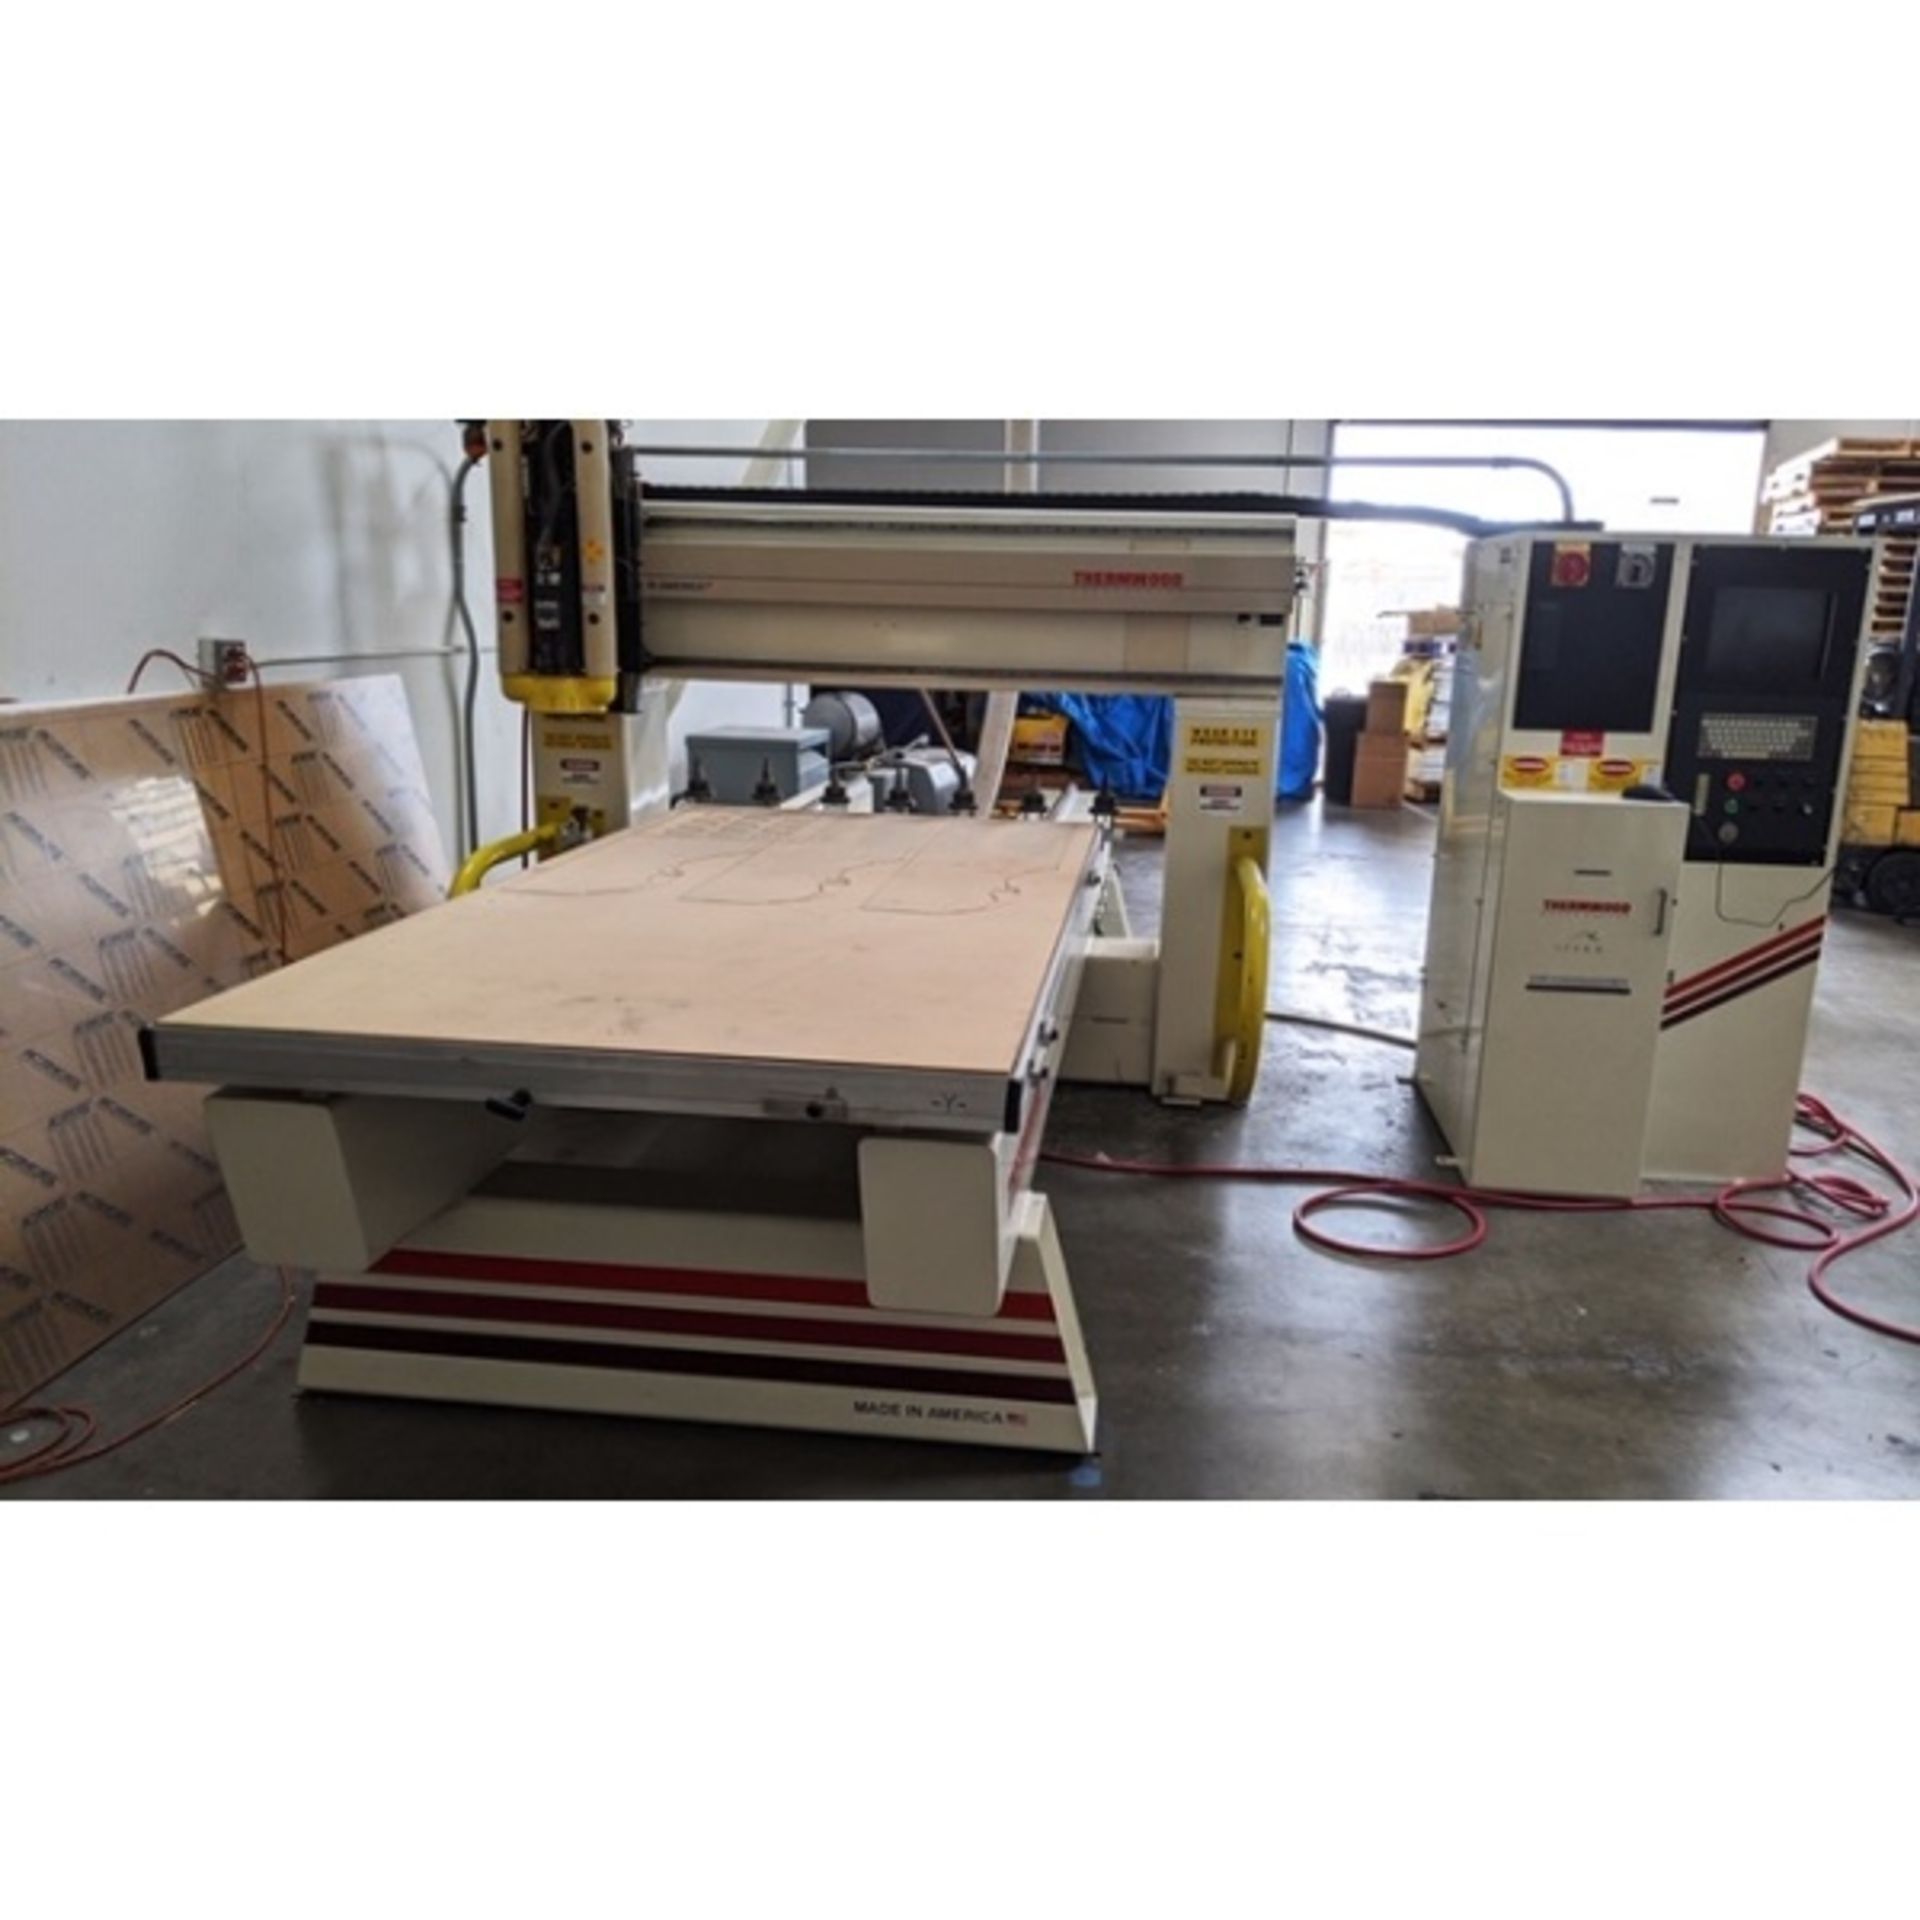 THERMWOOD MODEL CS40 3-AXIS CNC ROUTER - Image 6 of 6